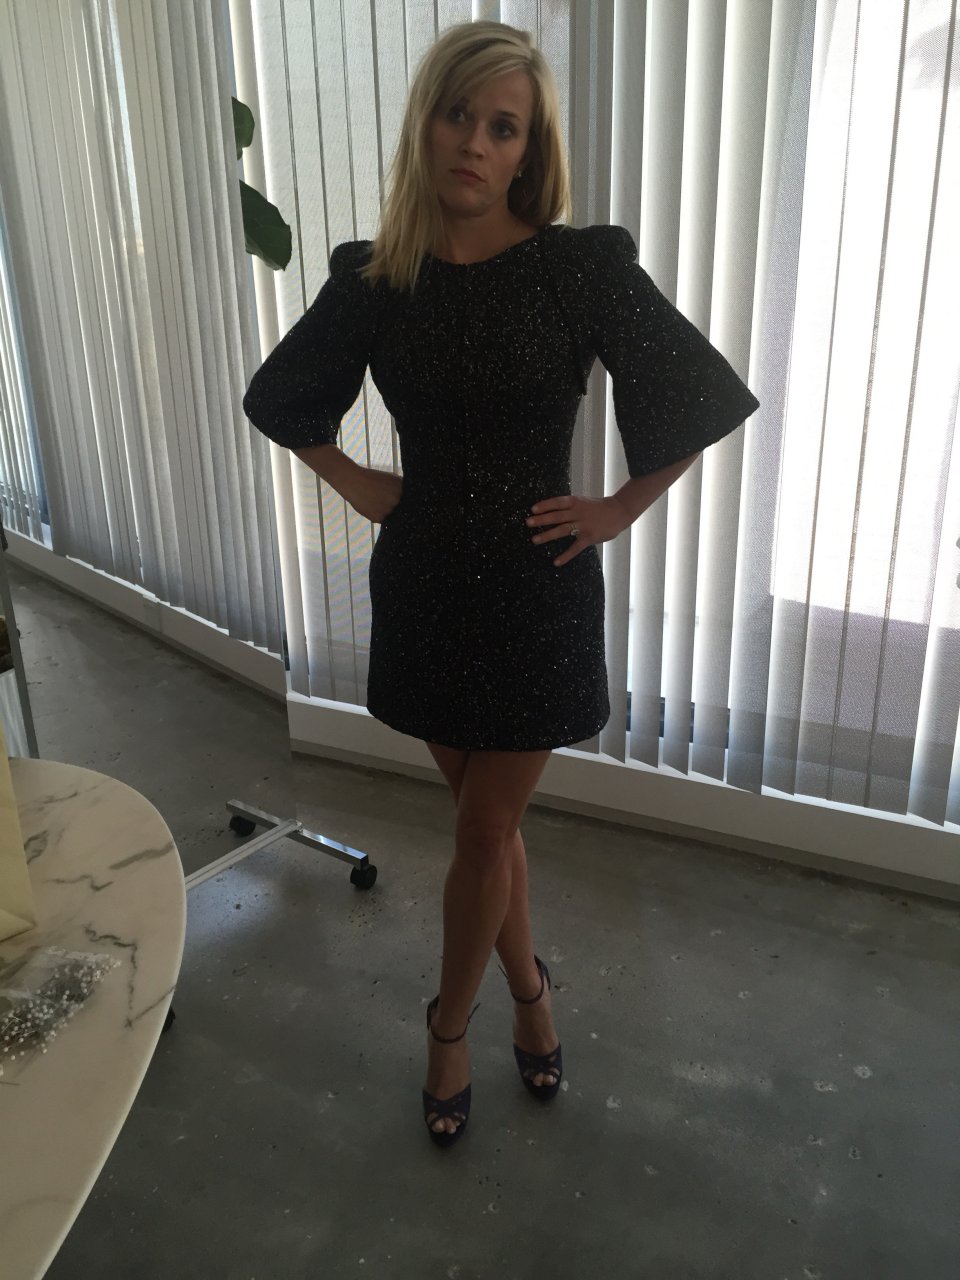 Reese Witherspoon Leaked Fappening 100 Photos And Videos